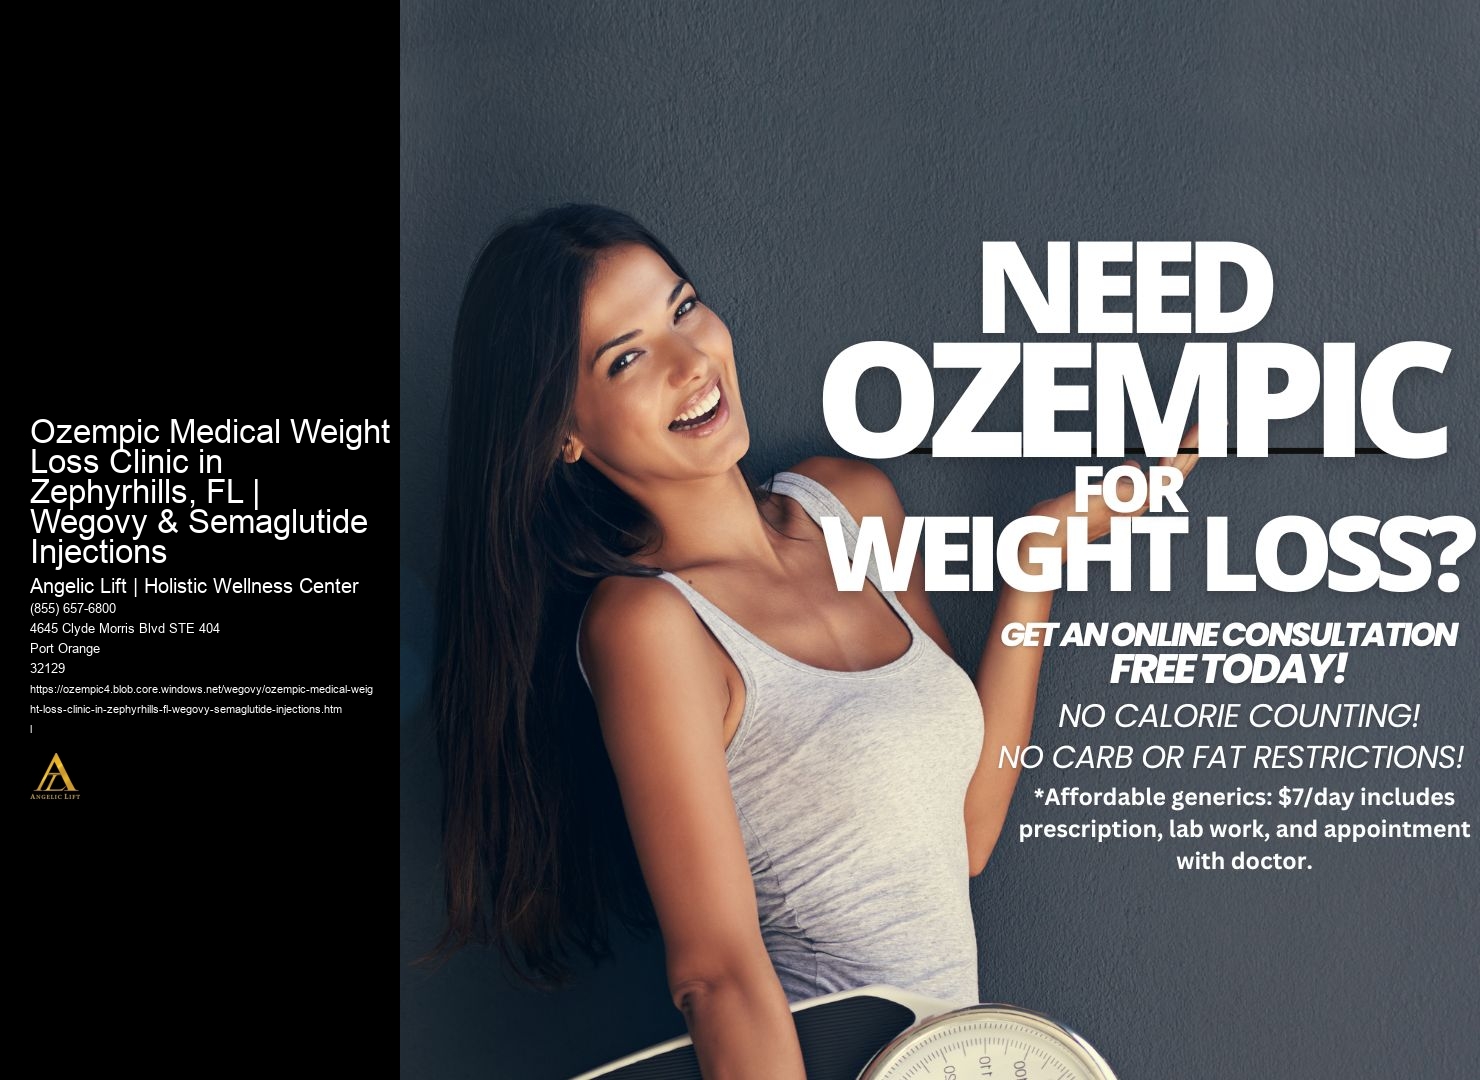 Ozempic Medical Weight Loss Clinic in Zephyrhills, FL | Wegovy & Semaglutide Injections